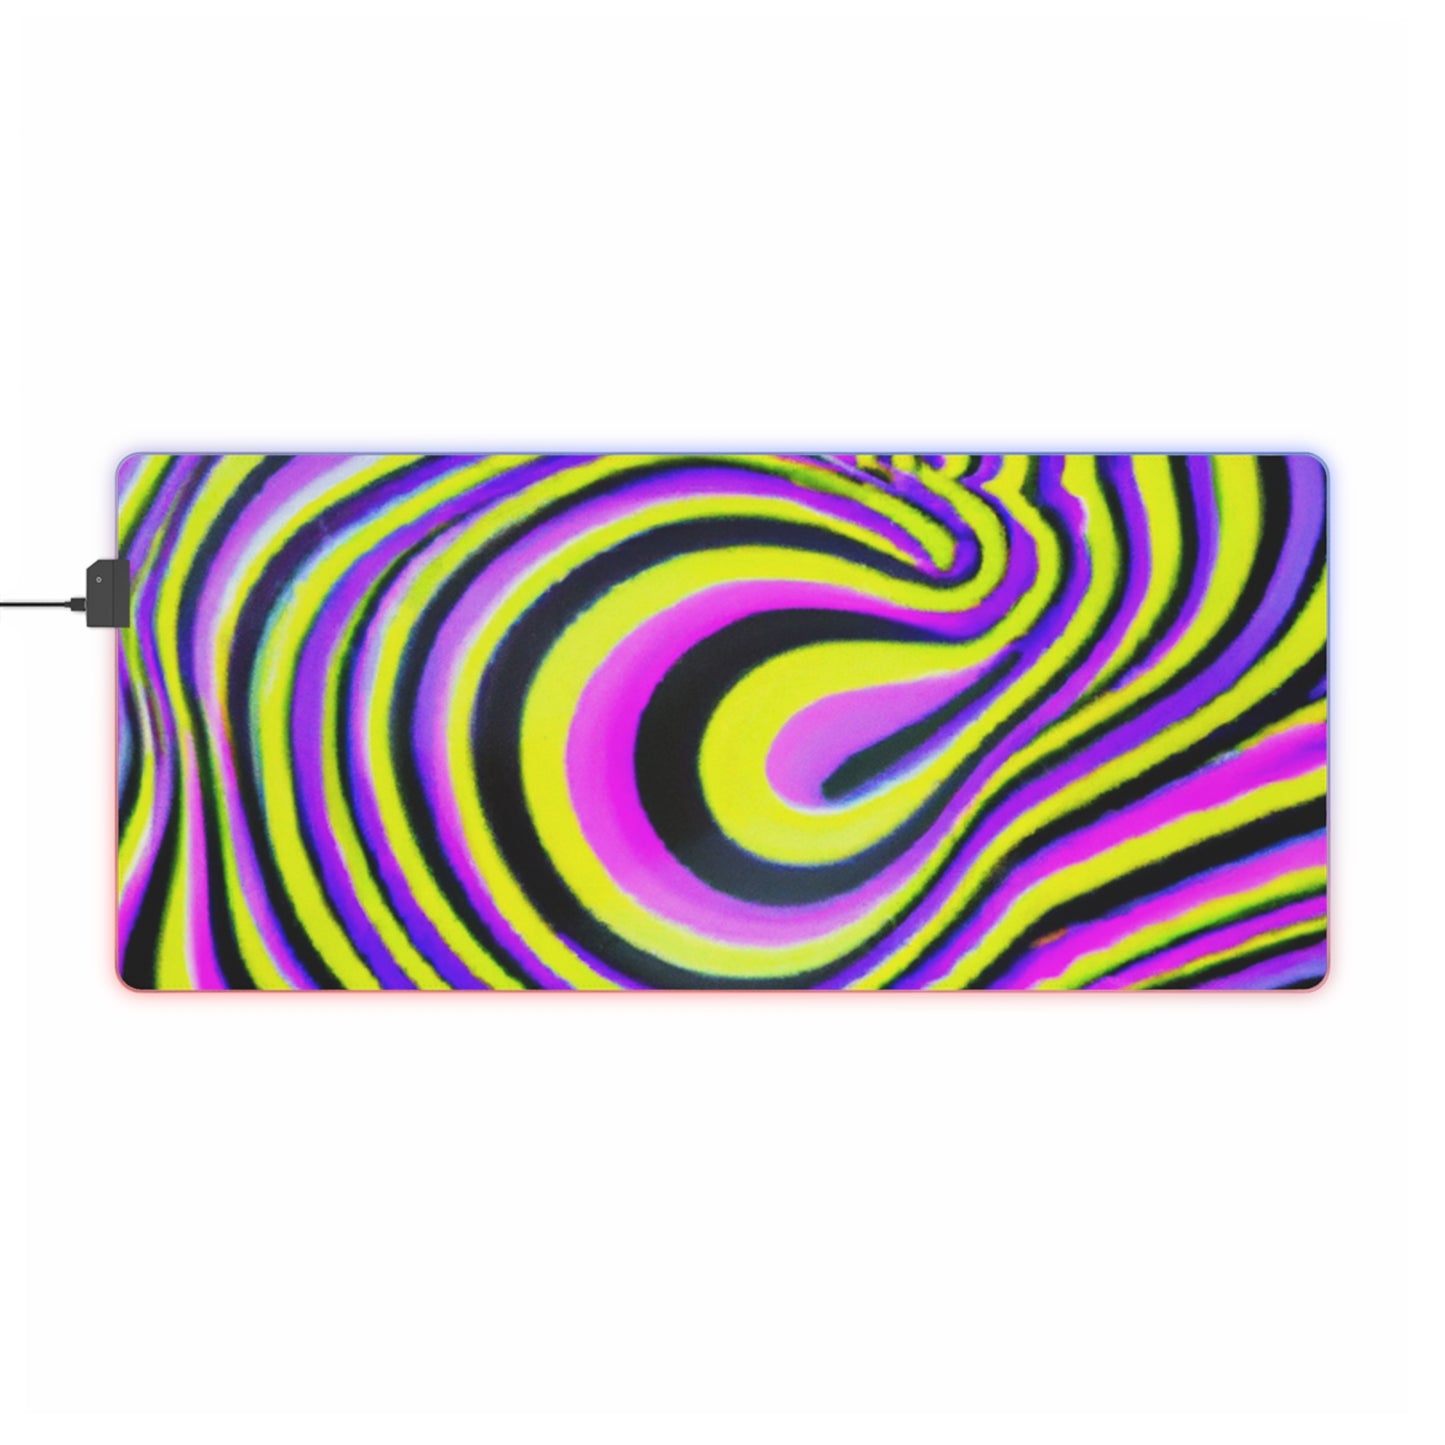 Brighton Blastoff - Psychedelic Trippy LED Light Up Gaming Mouse Pad